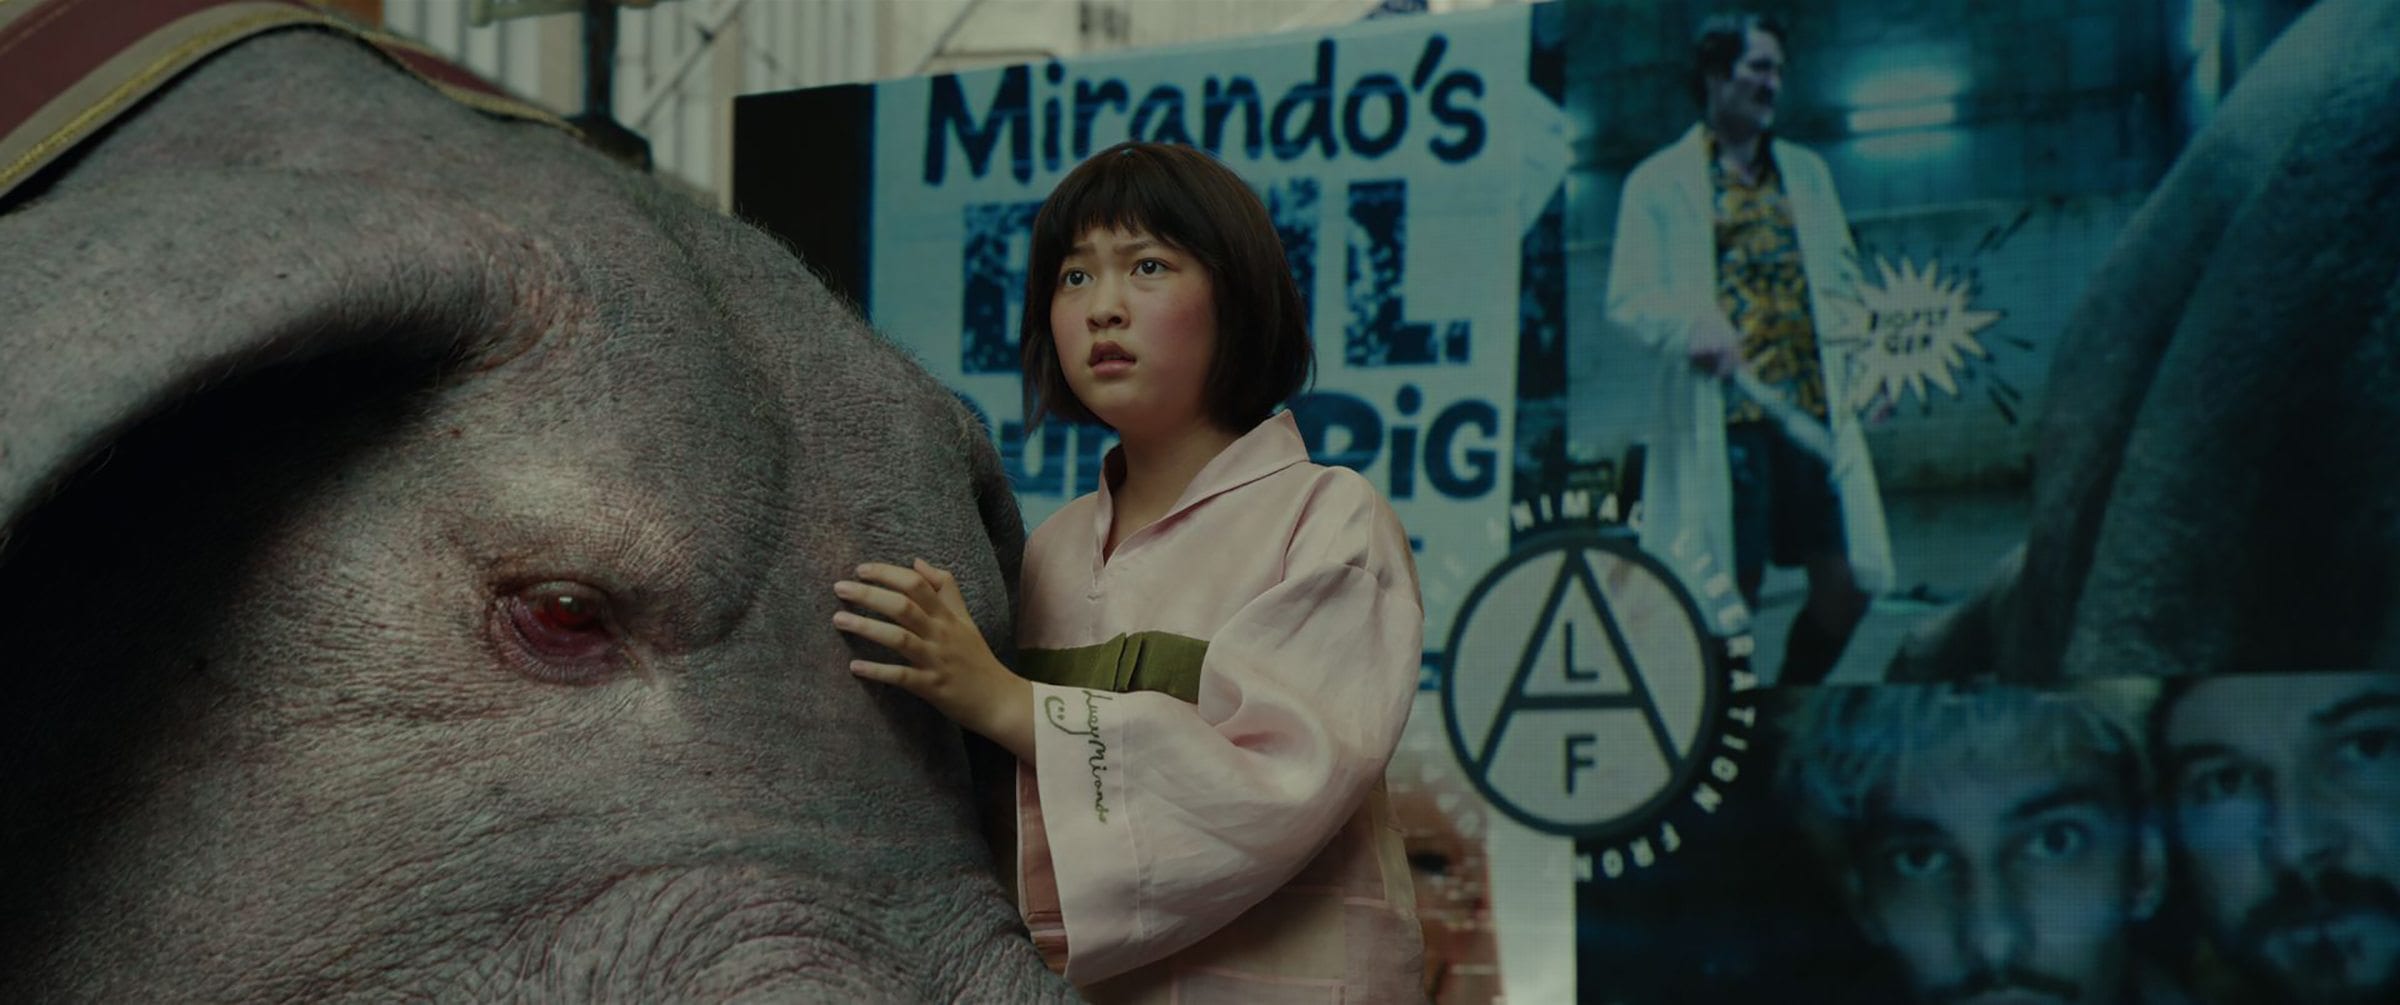 'Okja' aims boldly to decry Western greed by making it out to be even more gluttonous than the chubby ungulates on the screen.